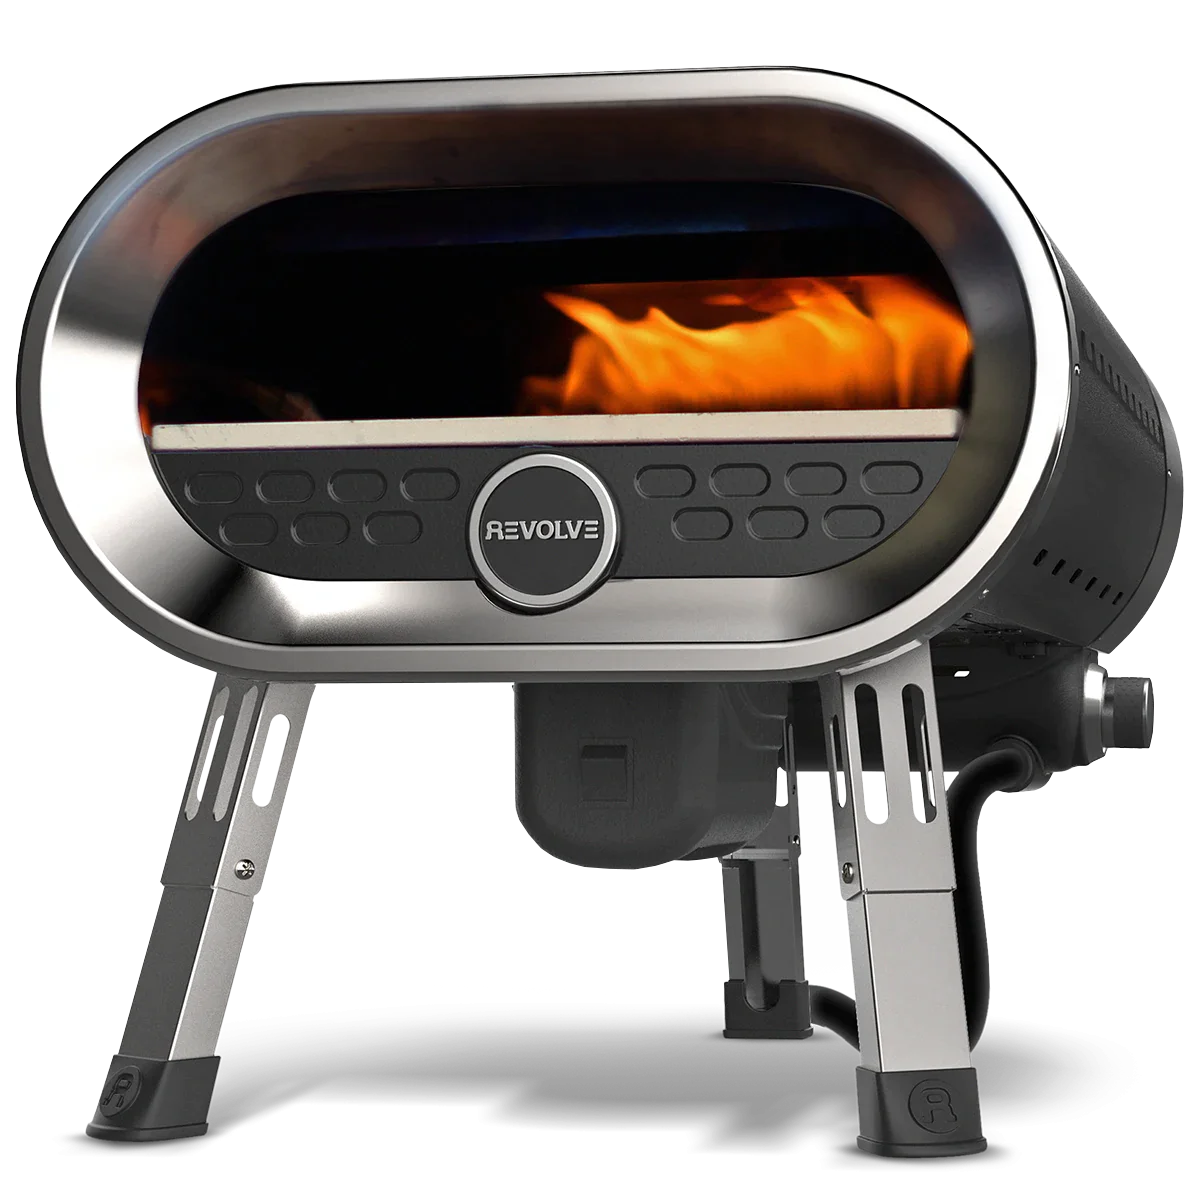 The Best Portable Pizza Oven – Revolve Pizza Oven